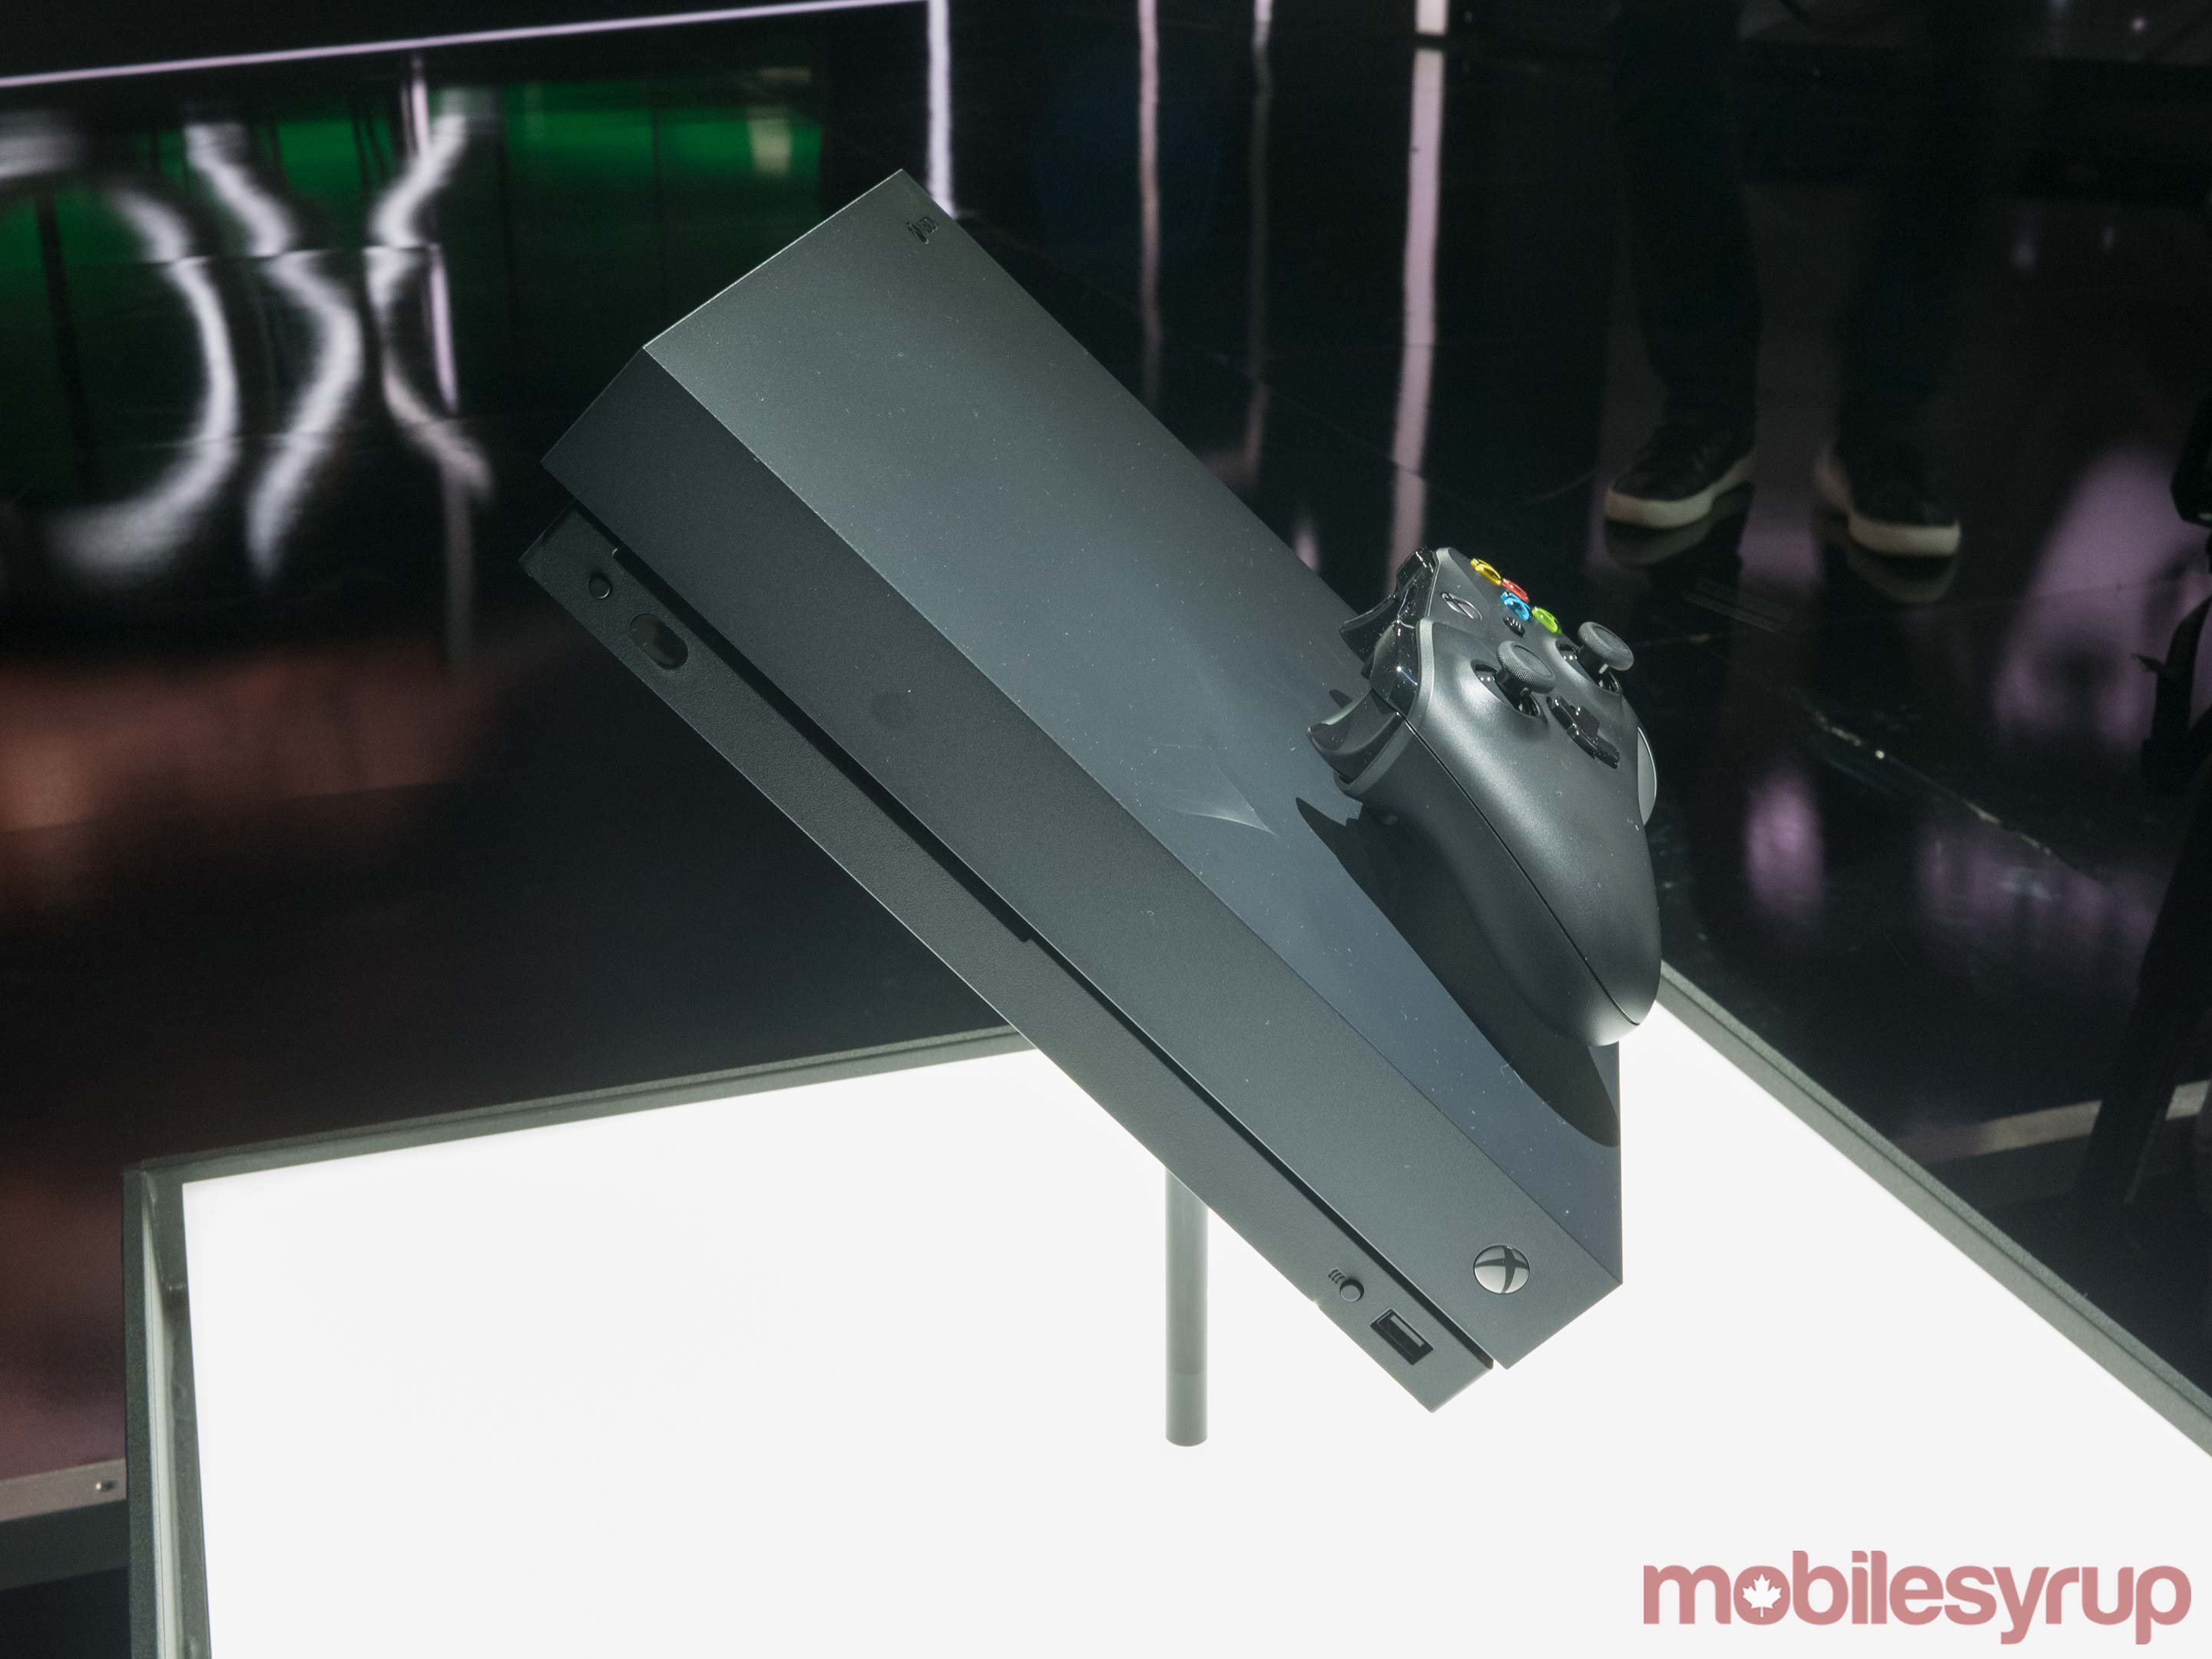 Xbox One X console side view